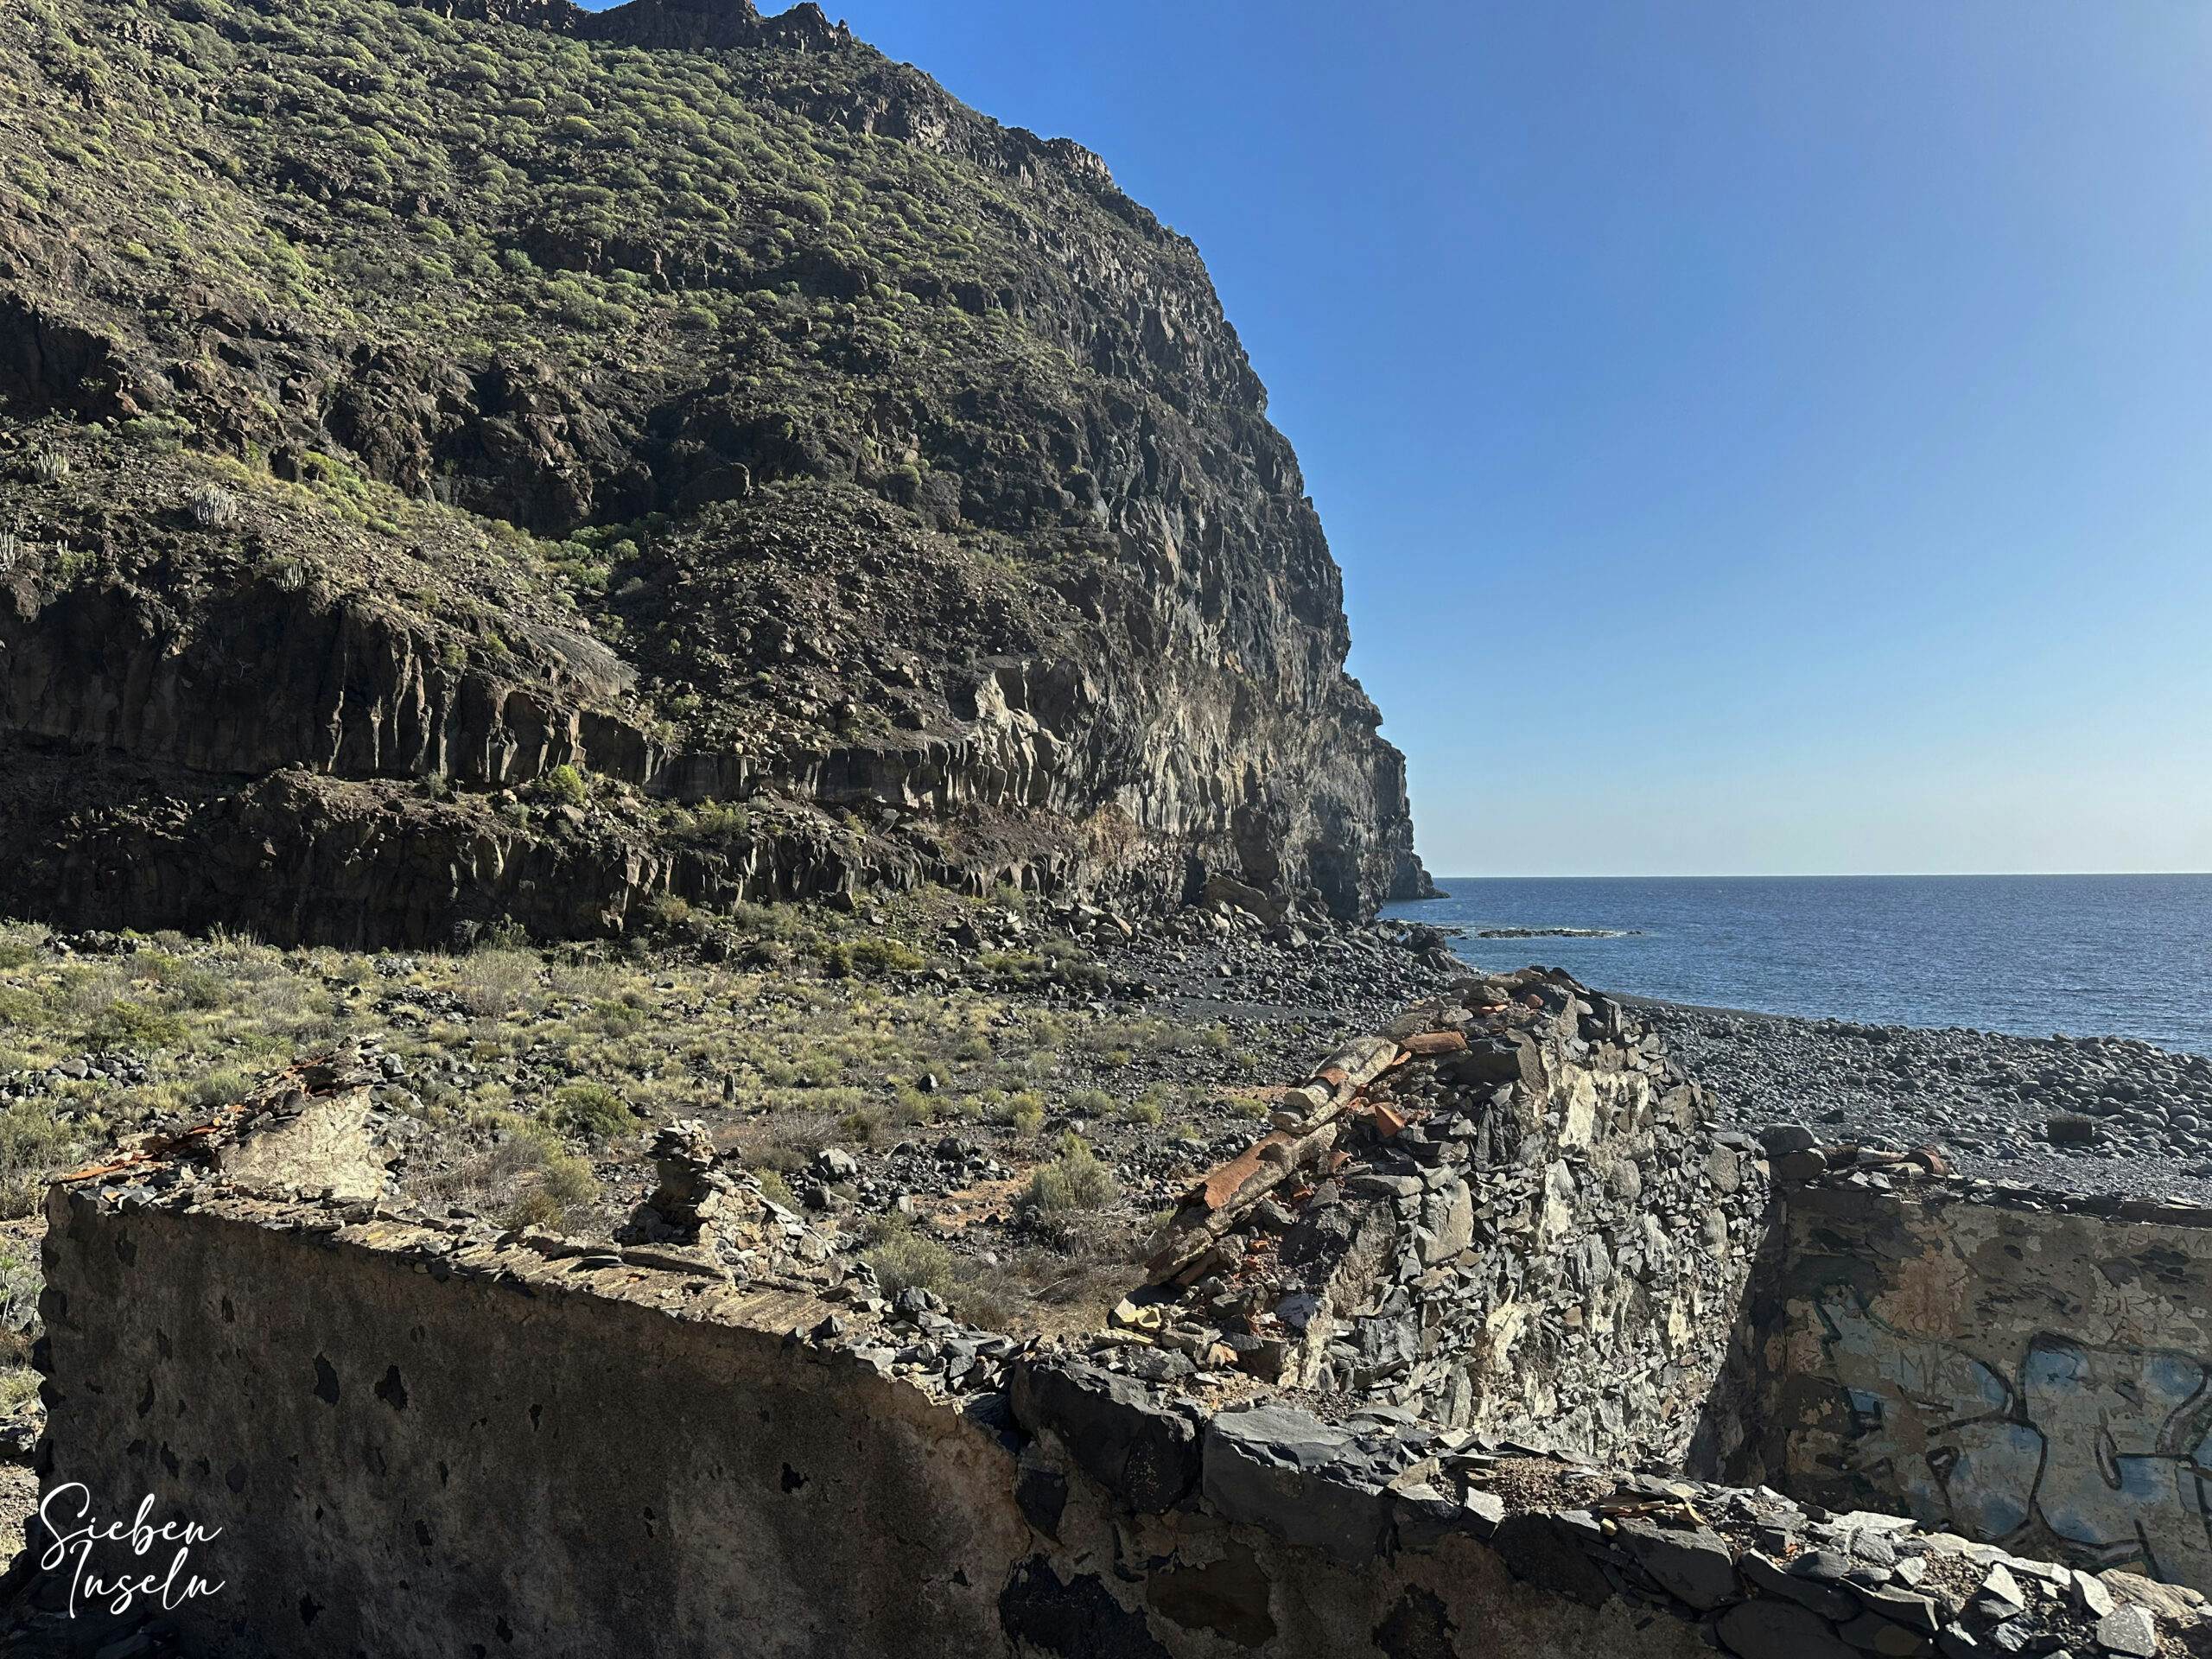 Hiking trail over the beach in Barranco Iguala with ancient ruins